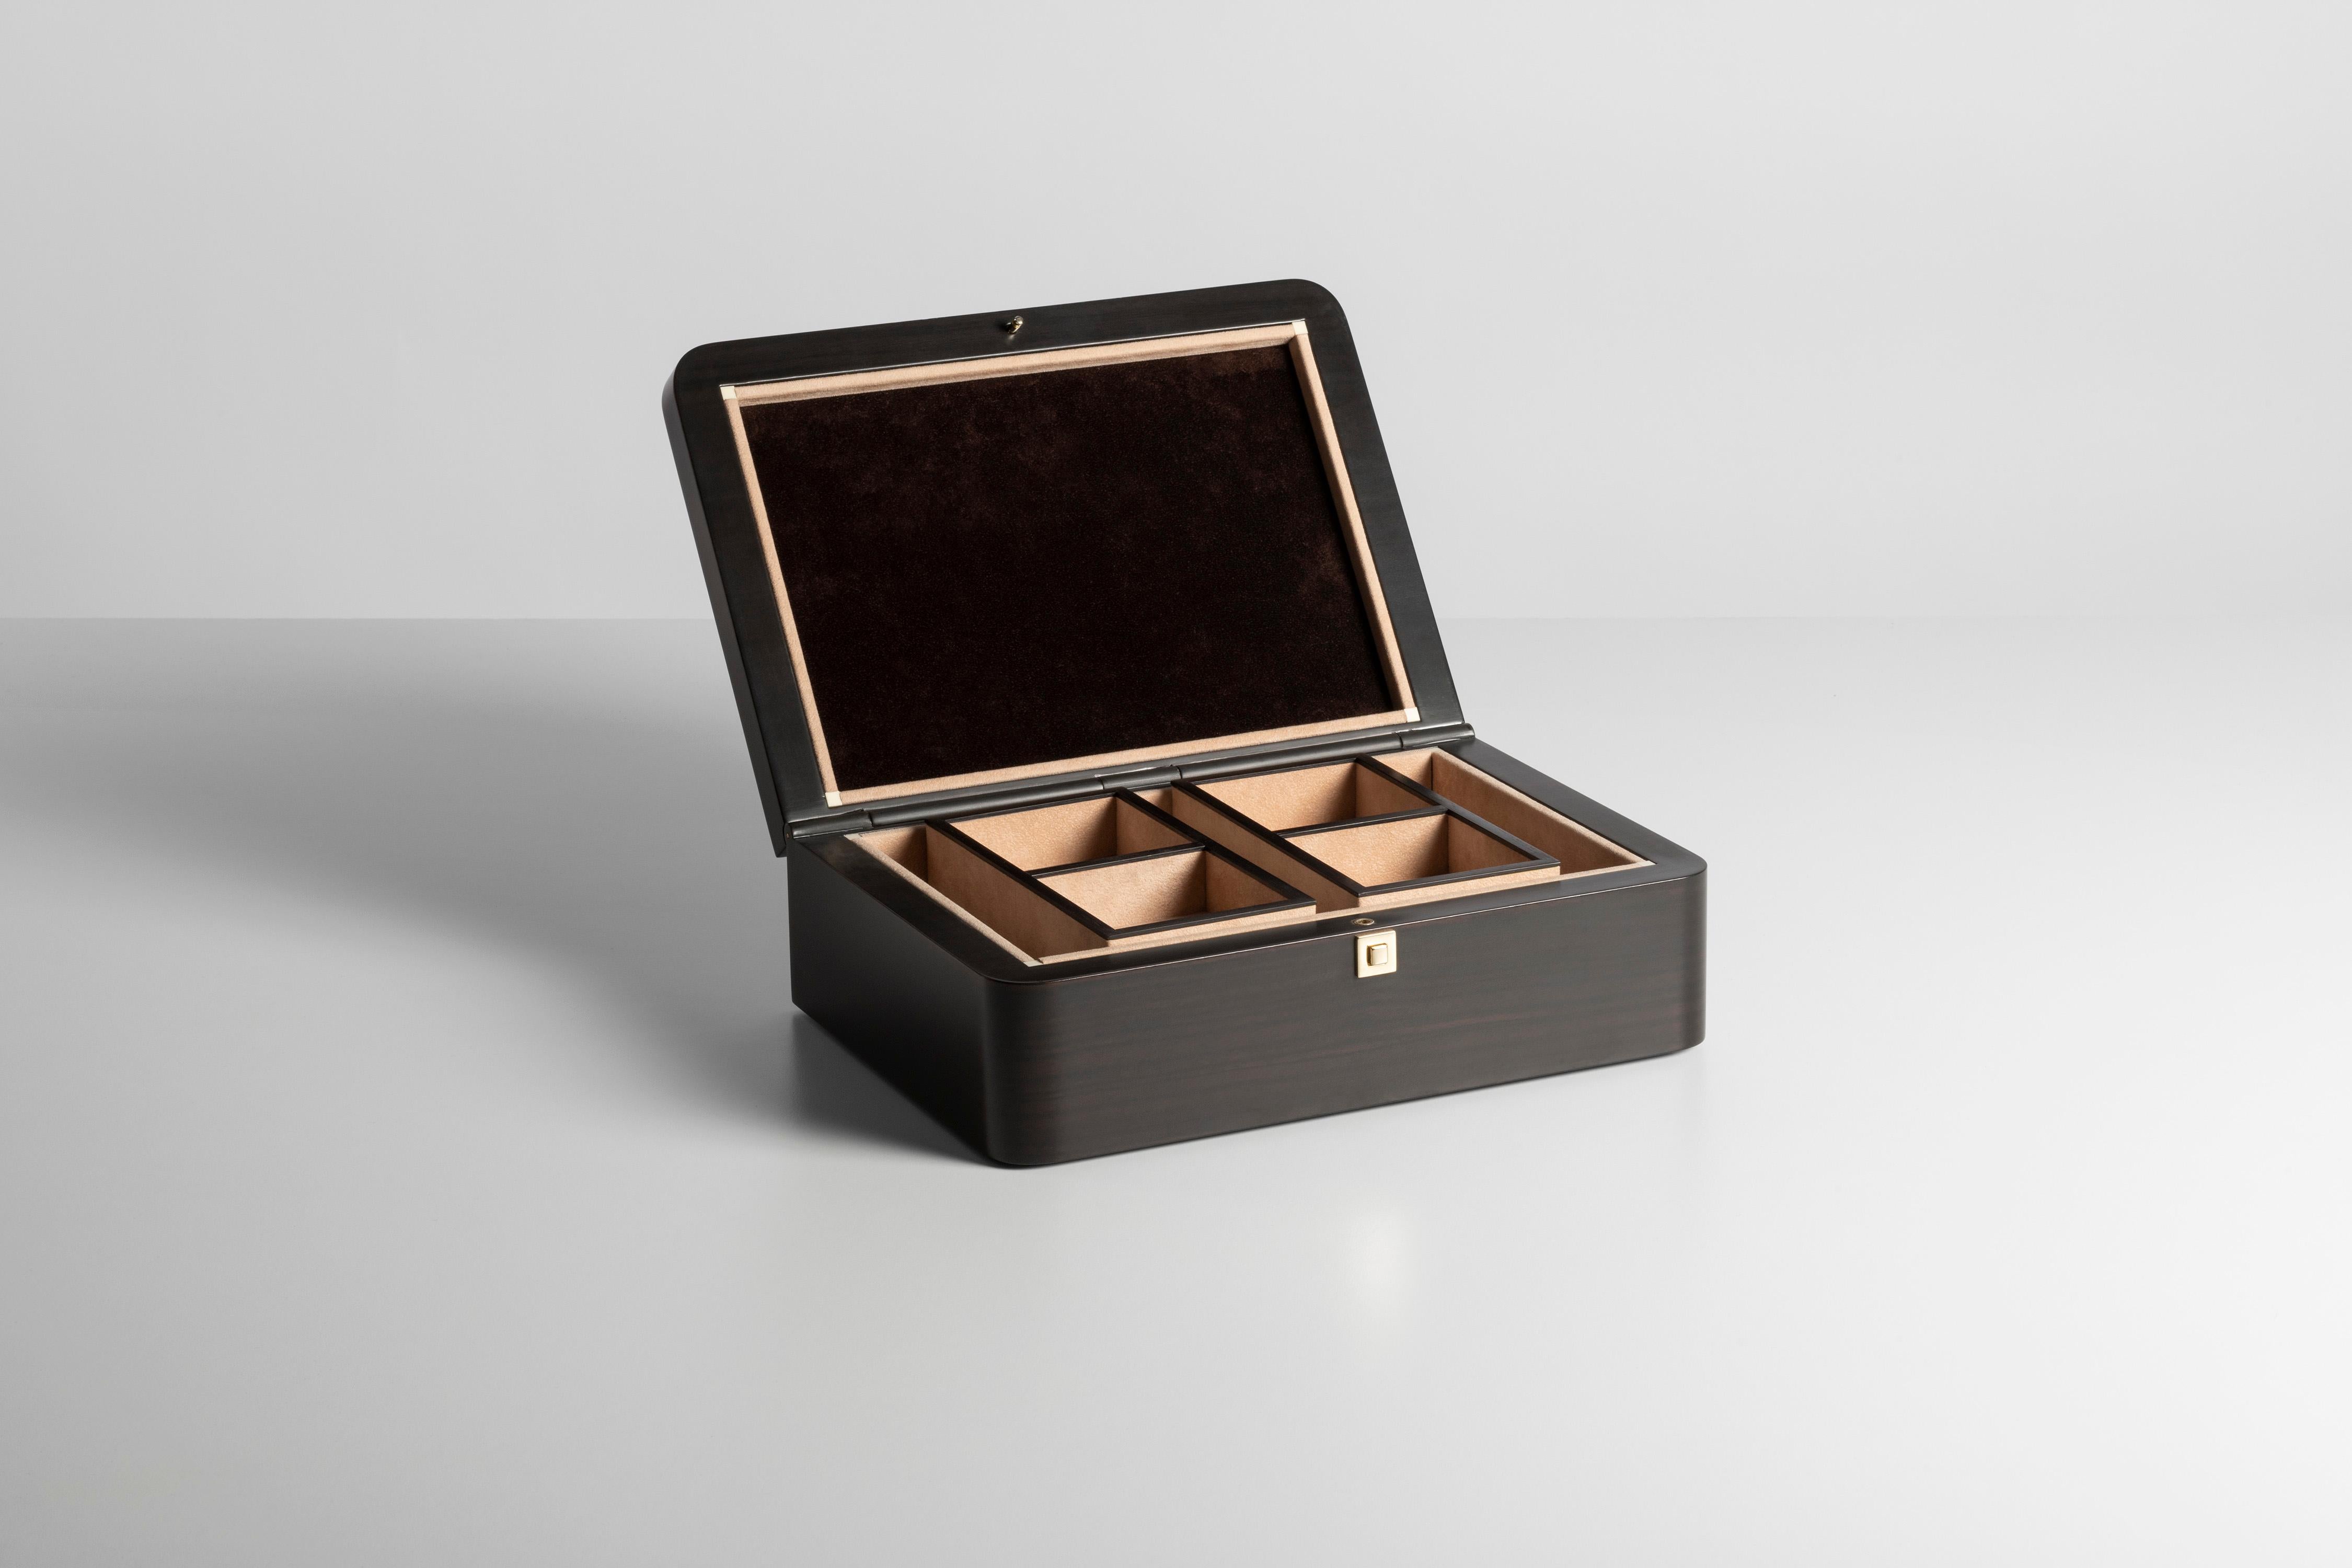 “Première Dame” is a jewelry box made of ebony. The inside is divided in different compartments covered in soft suede. The engraved decoration on the lid is inspired by a renowned Renaissance portrait of a woman and the necklace that stands out